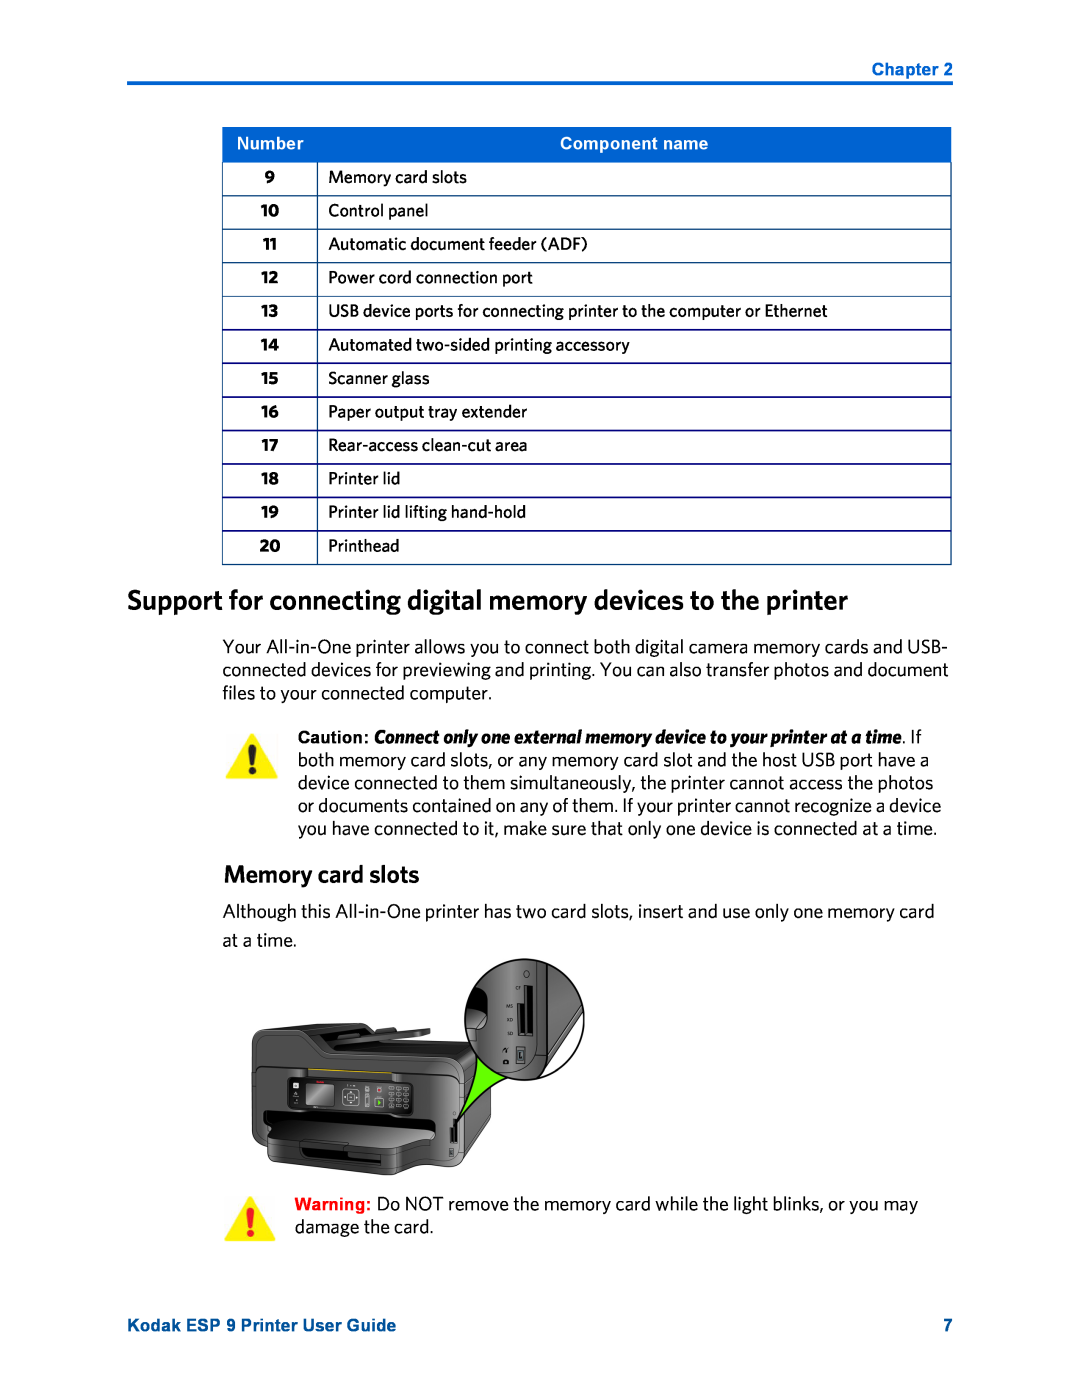 Kodak ESP 9 manual Support for connecting digital memory devices to the printer, Memory card slots 